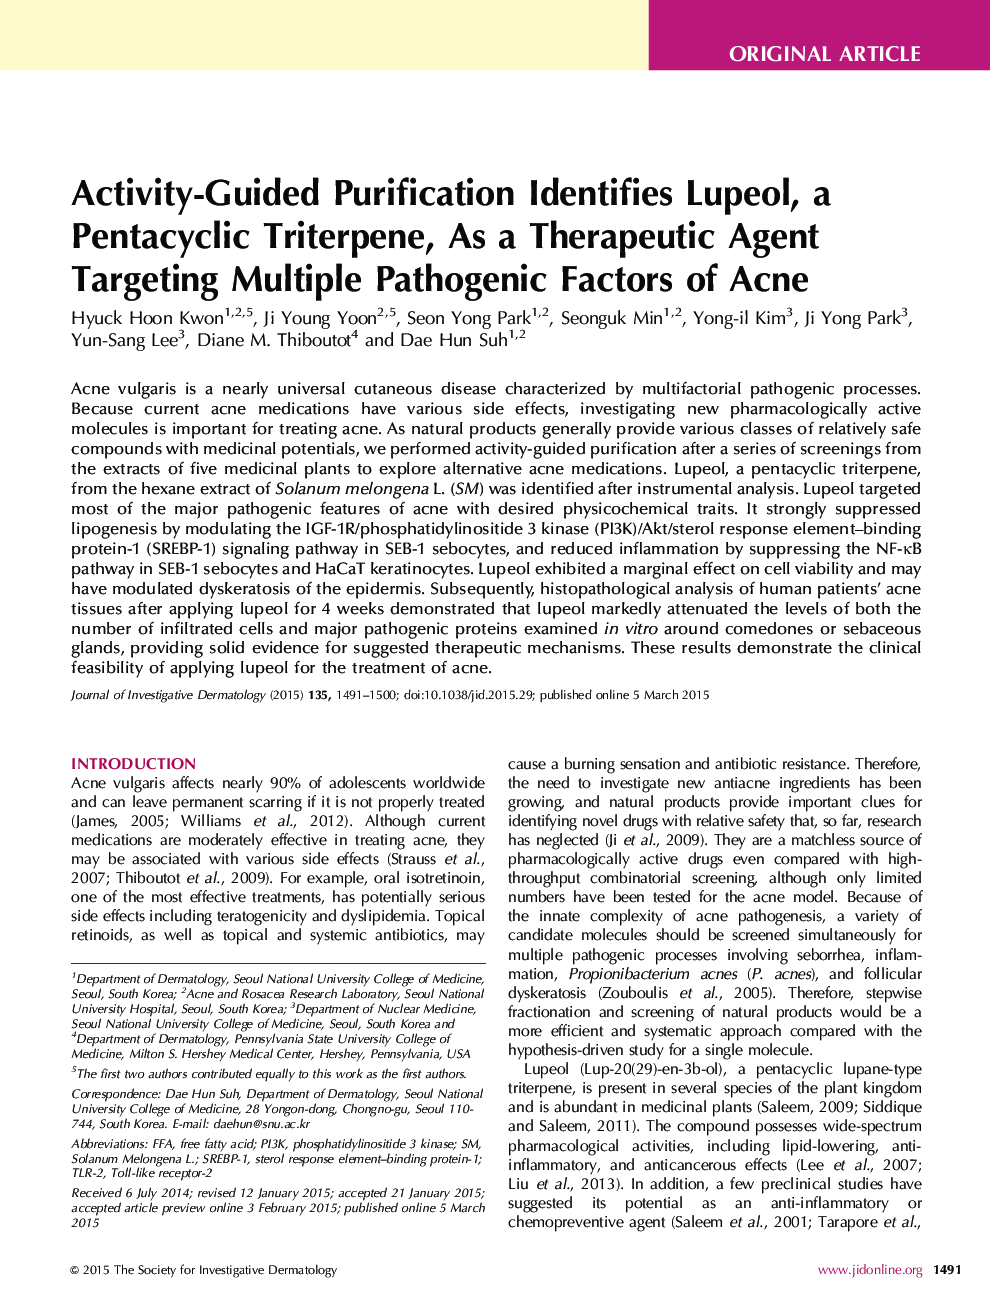 Original ArticleActivity-Guided Purification Identifies Lupeol, a Pentacyclic Triterpene, As a Therapeutic Agent Multiple Pathogenic Factors of Acne